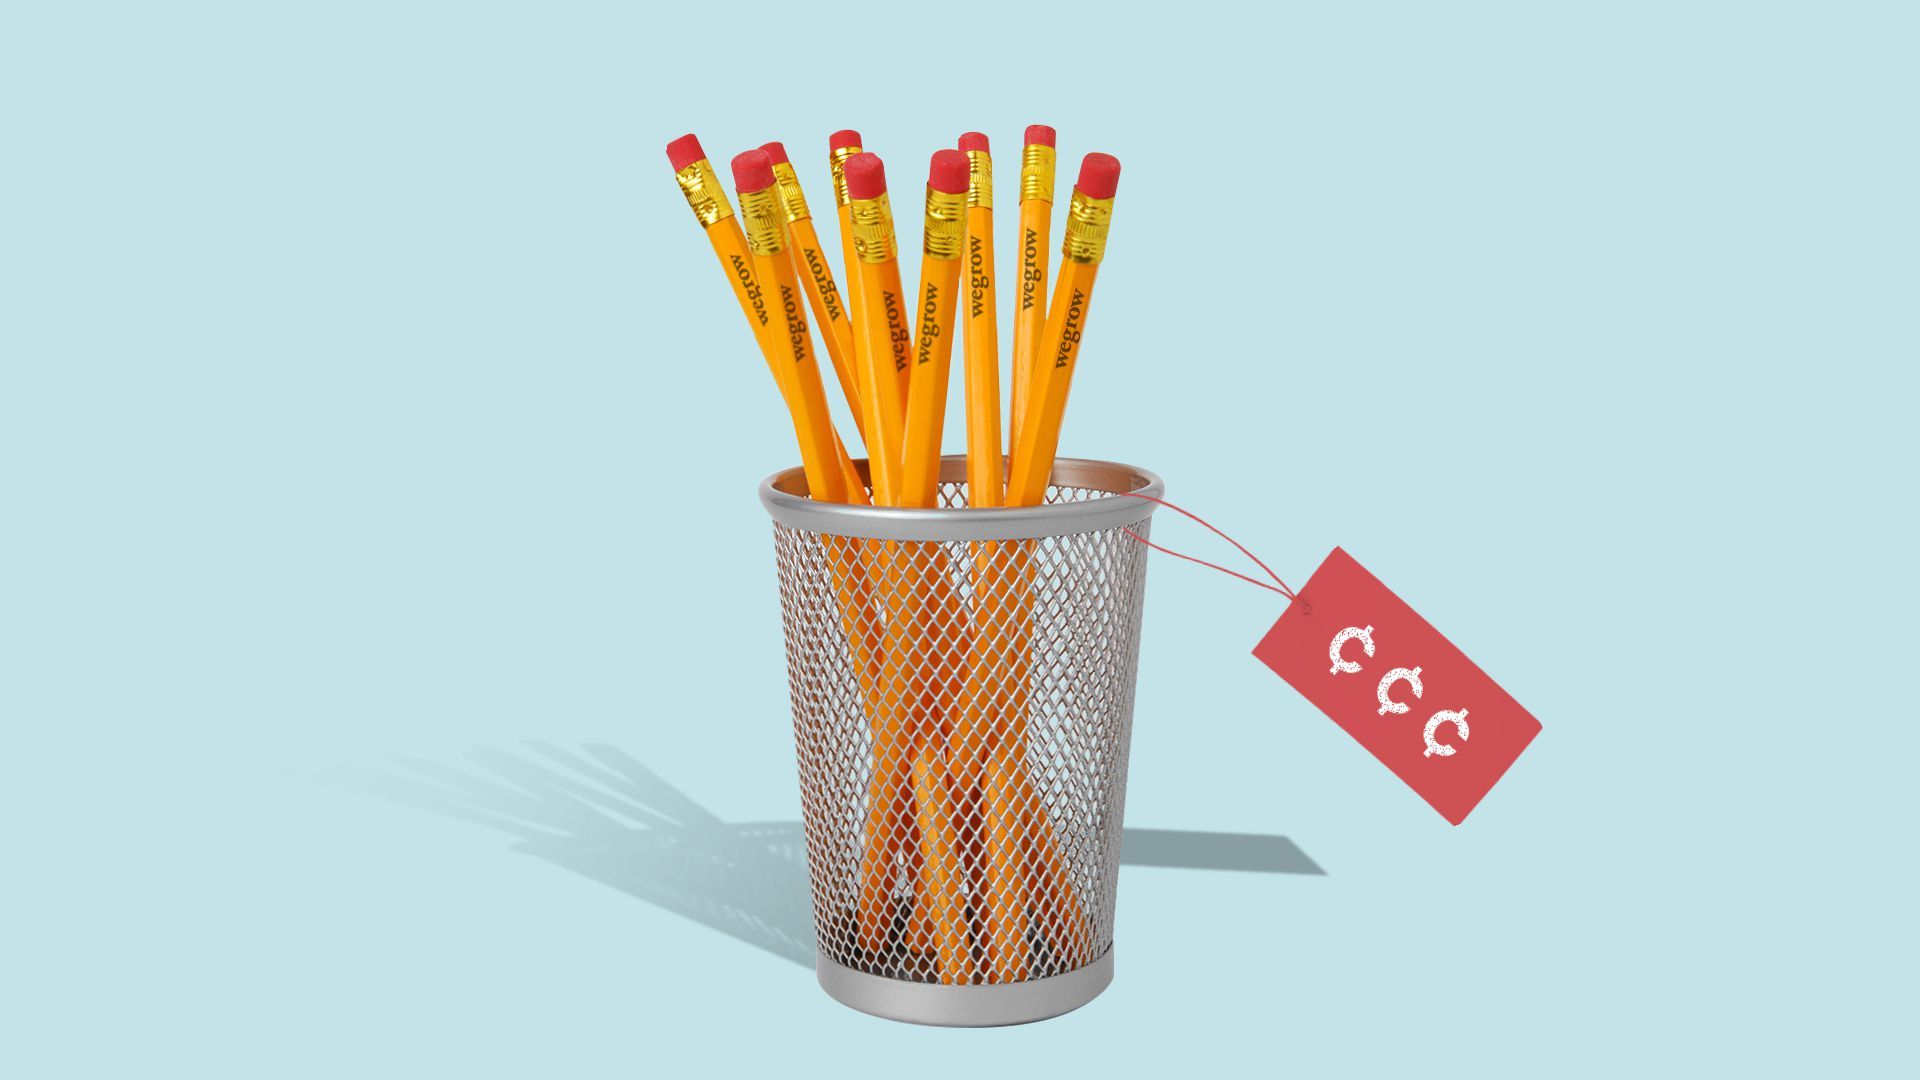 Illustration of a cup of wegrow pencils with a price tag showing several cent symbols.   